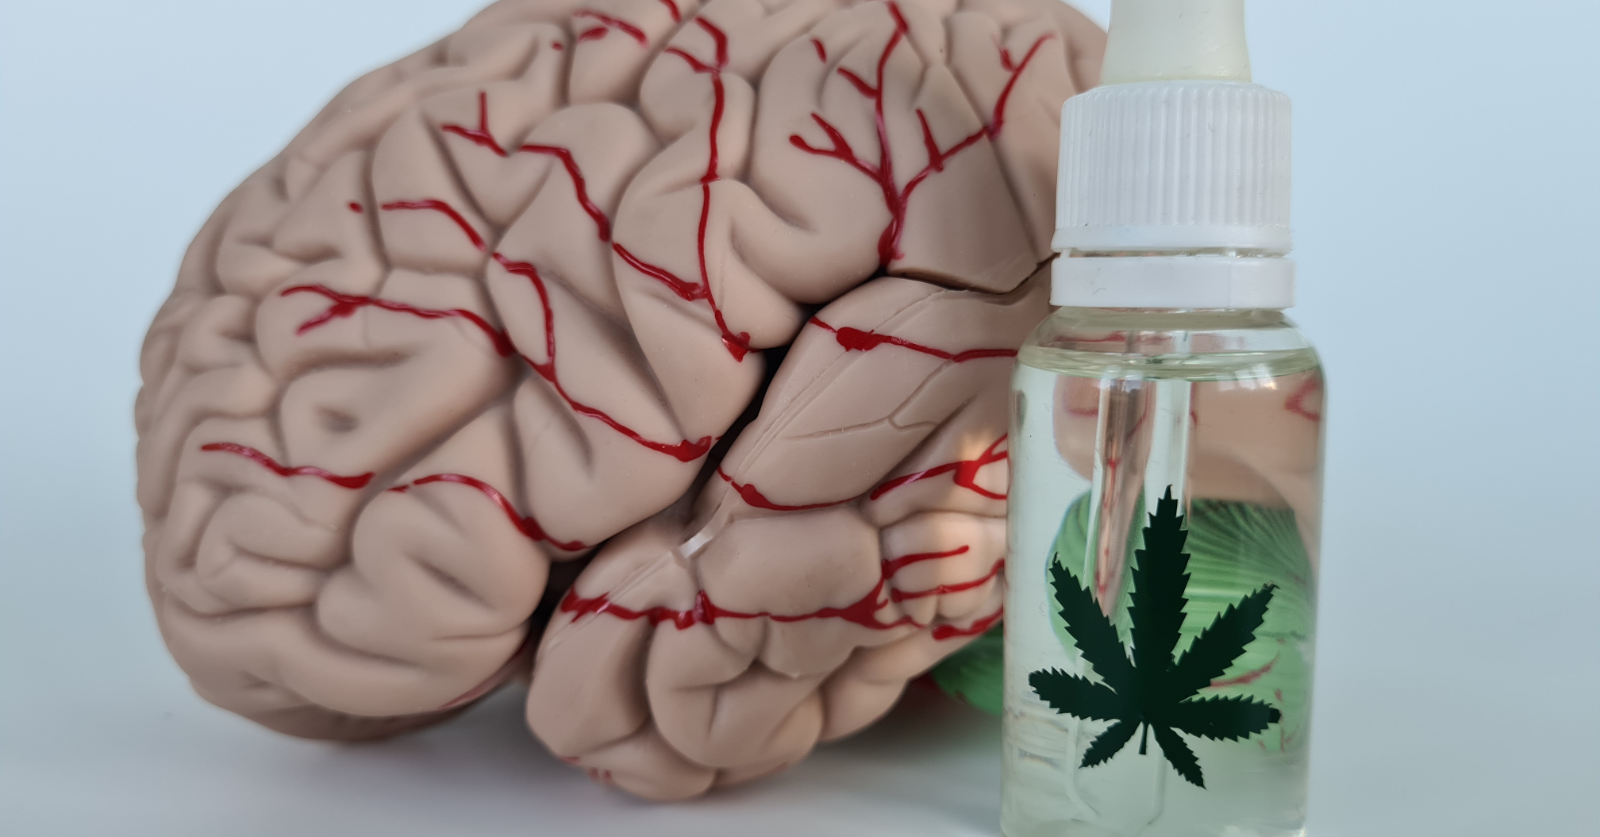 Research reveals genetic link to cannabis use disorder